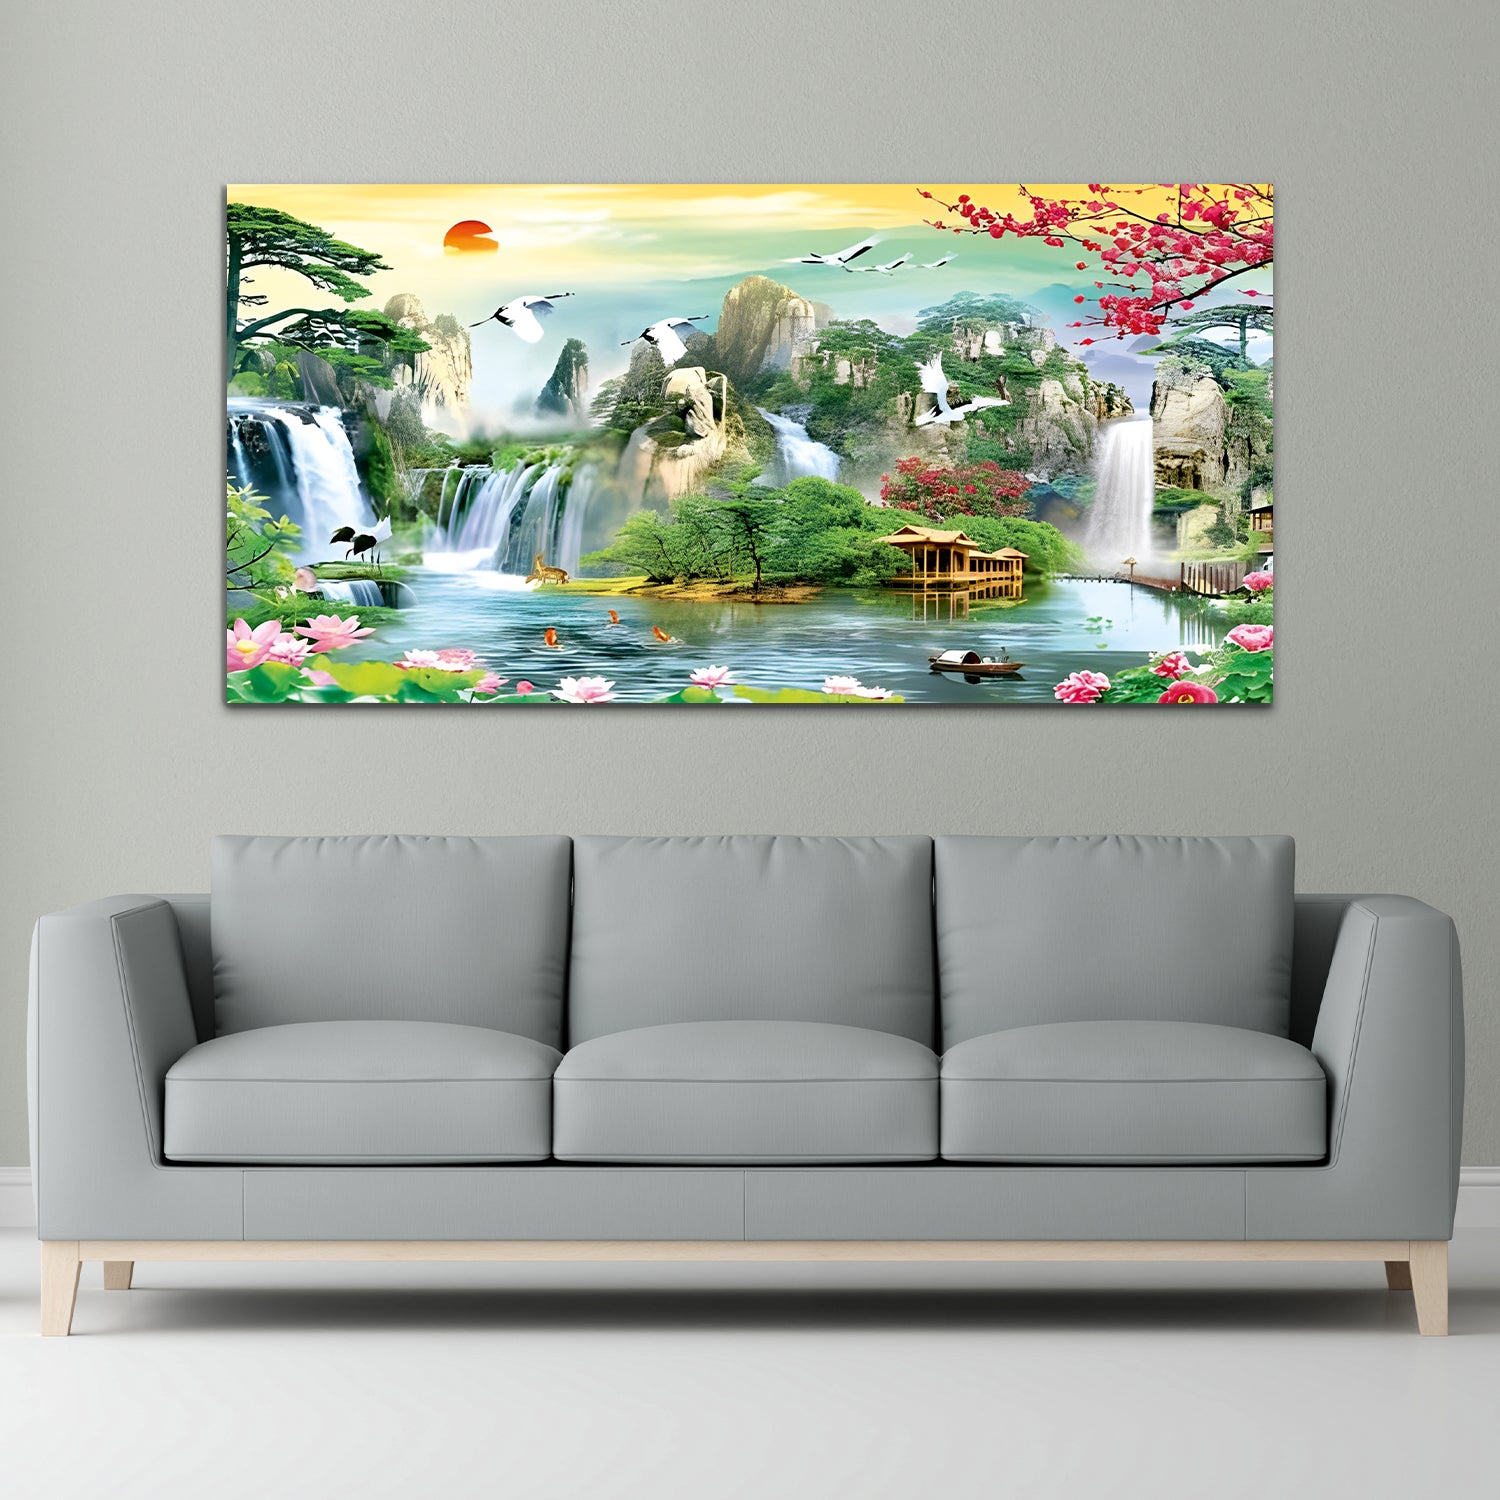 beautiful scenery living room bedroom wall decoration Canvas Wall Painting